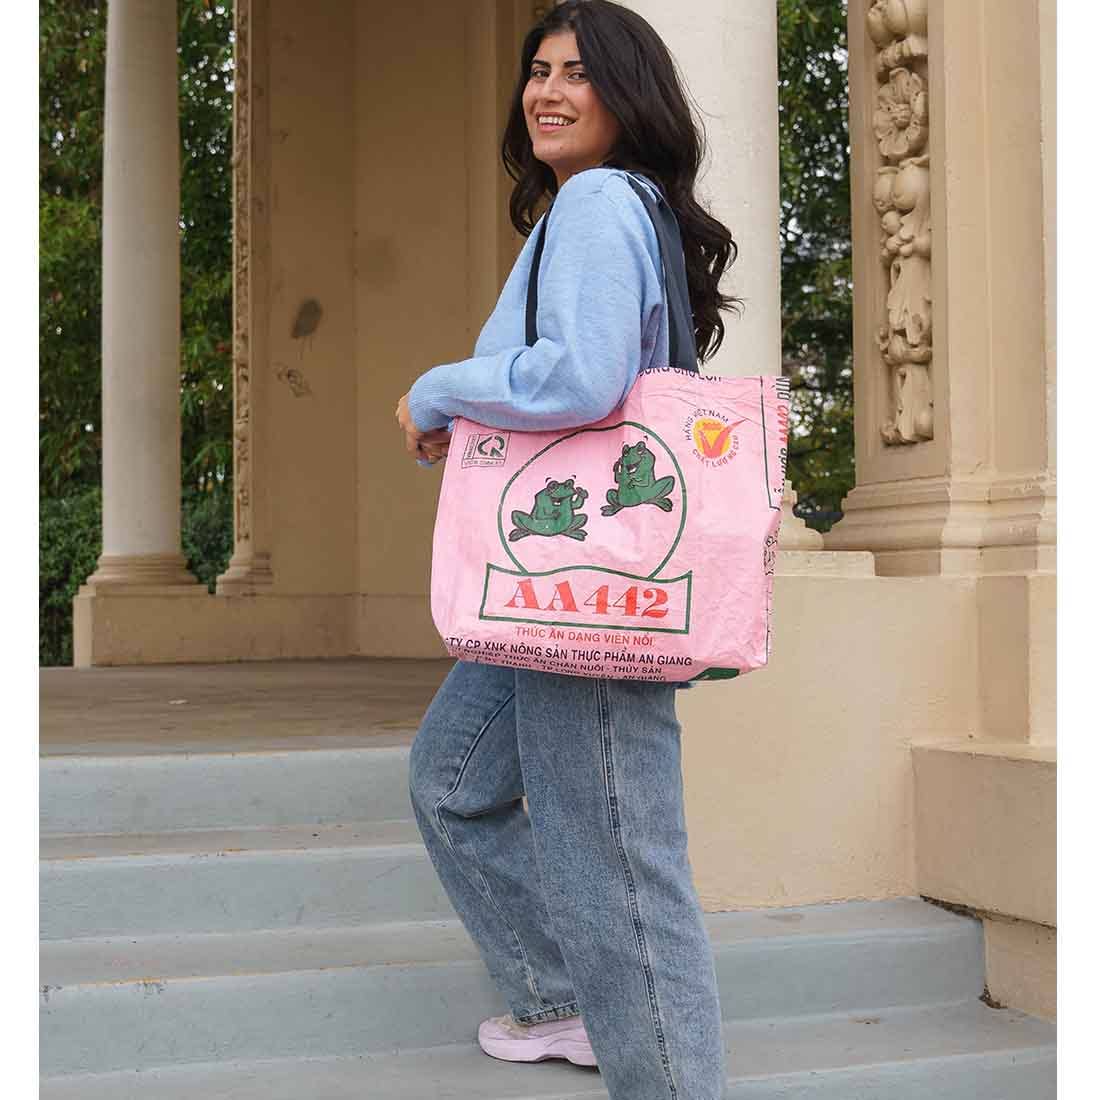 
  
  Pink  Shopping Tote - Recycled
  
